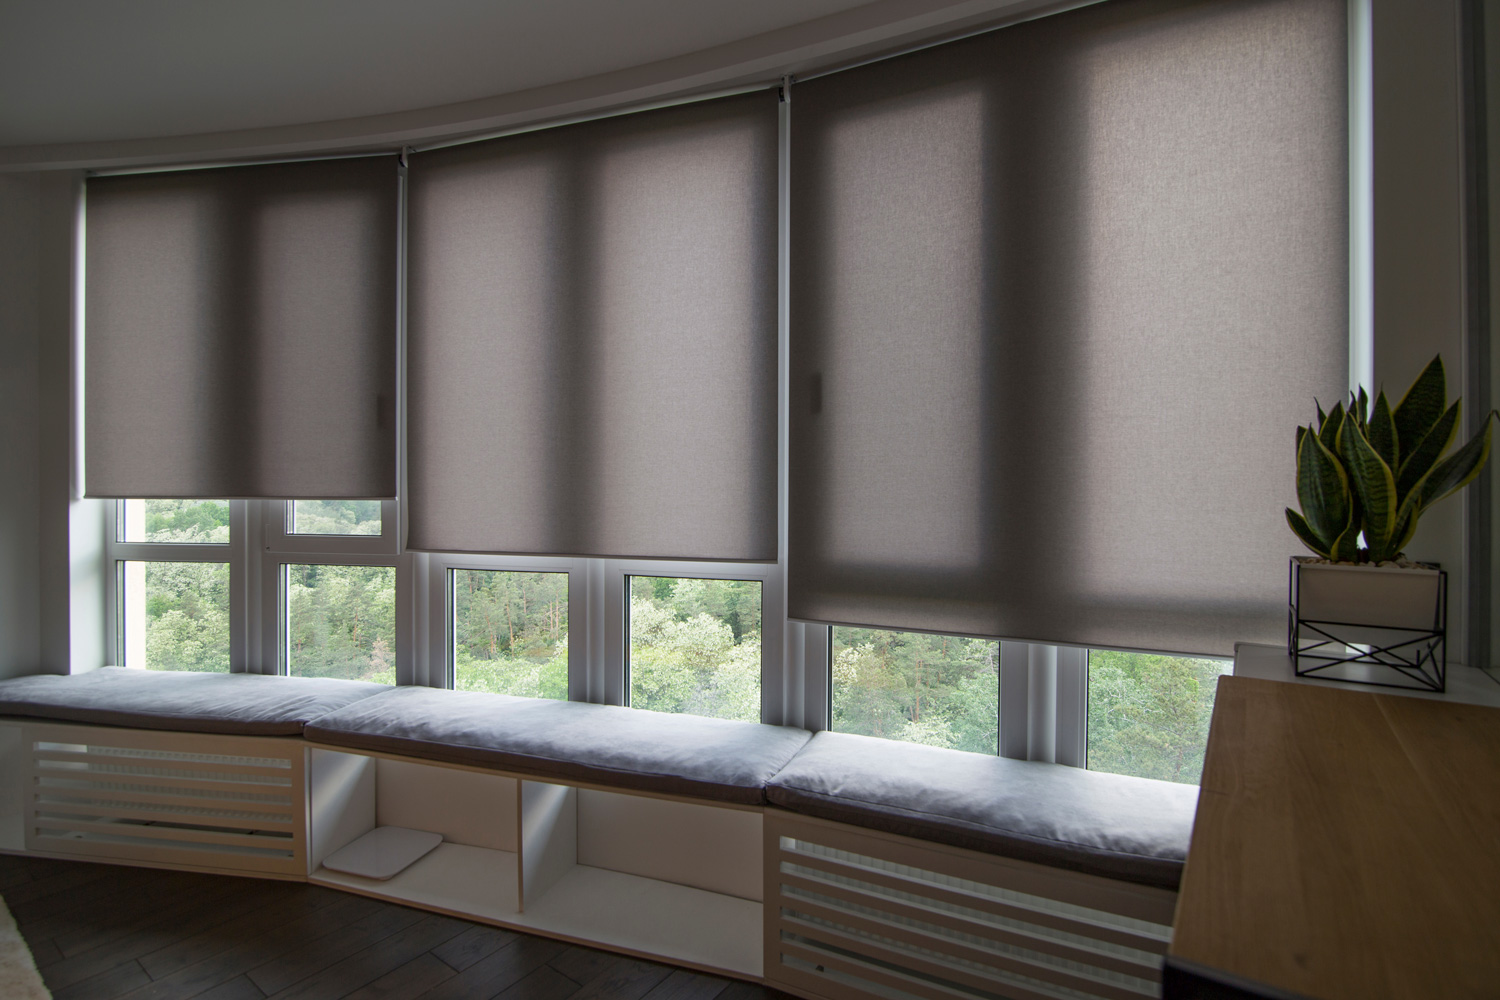 Motorized roller shades in the interior. Automatic roller blinds beige color on big glass windows.